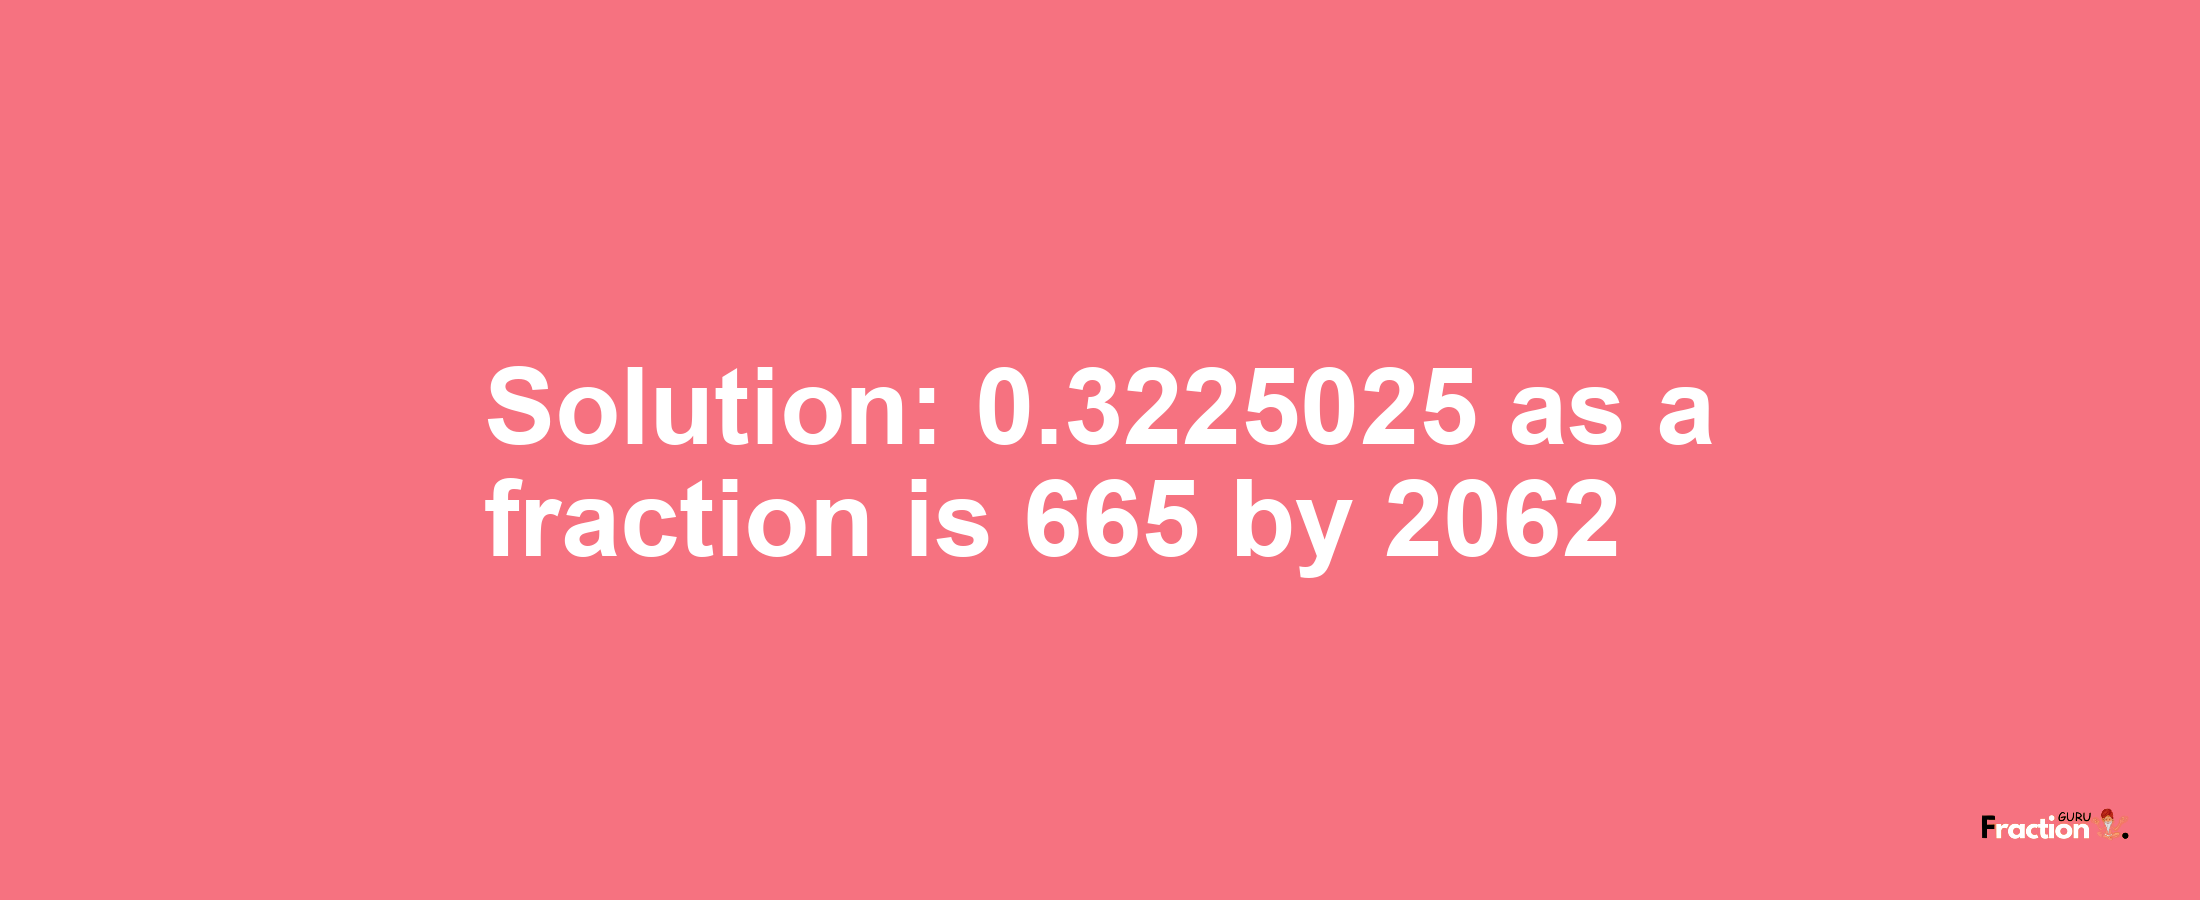 Solution:0.3225025 as a fraction is 665/2062